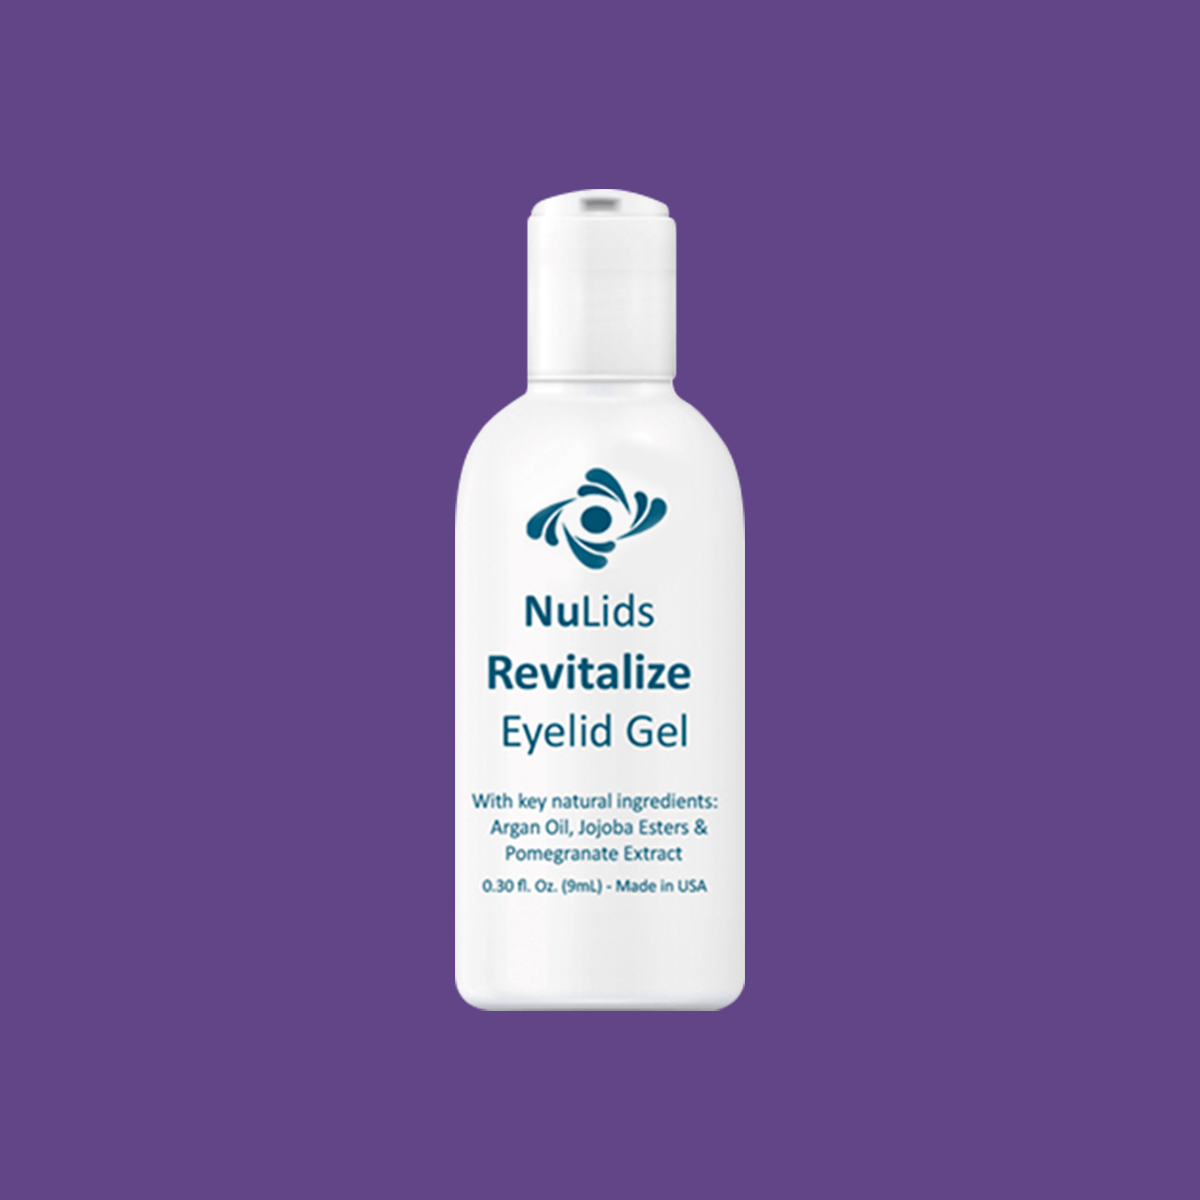 NuLids All Natural At-home Dry Eye Treatment 180 ( 1 Device + 180 Tips + Applicator Gel Included) - DryEye Rescue Store